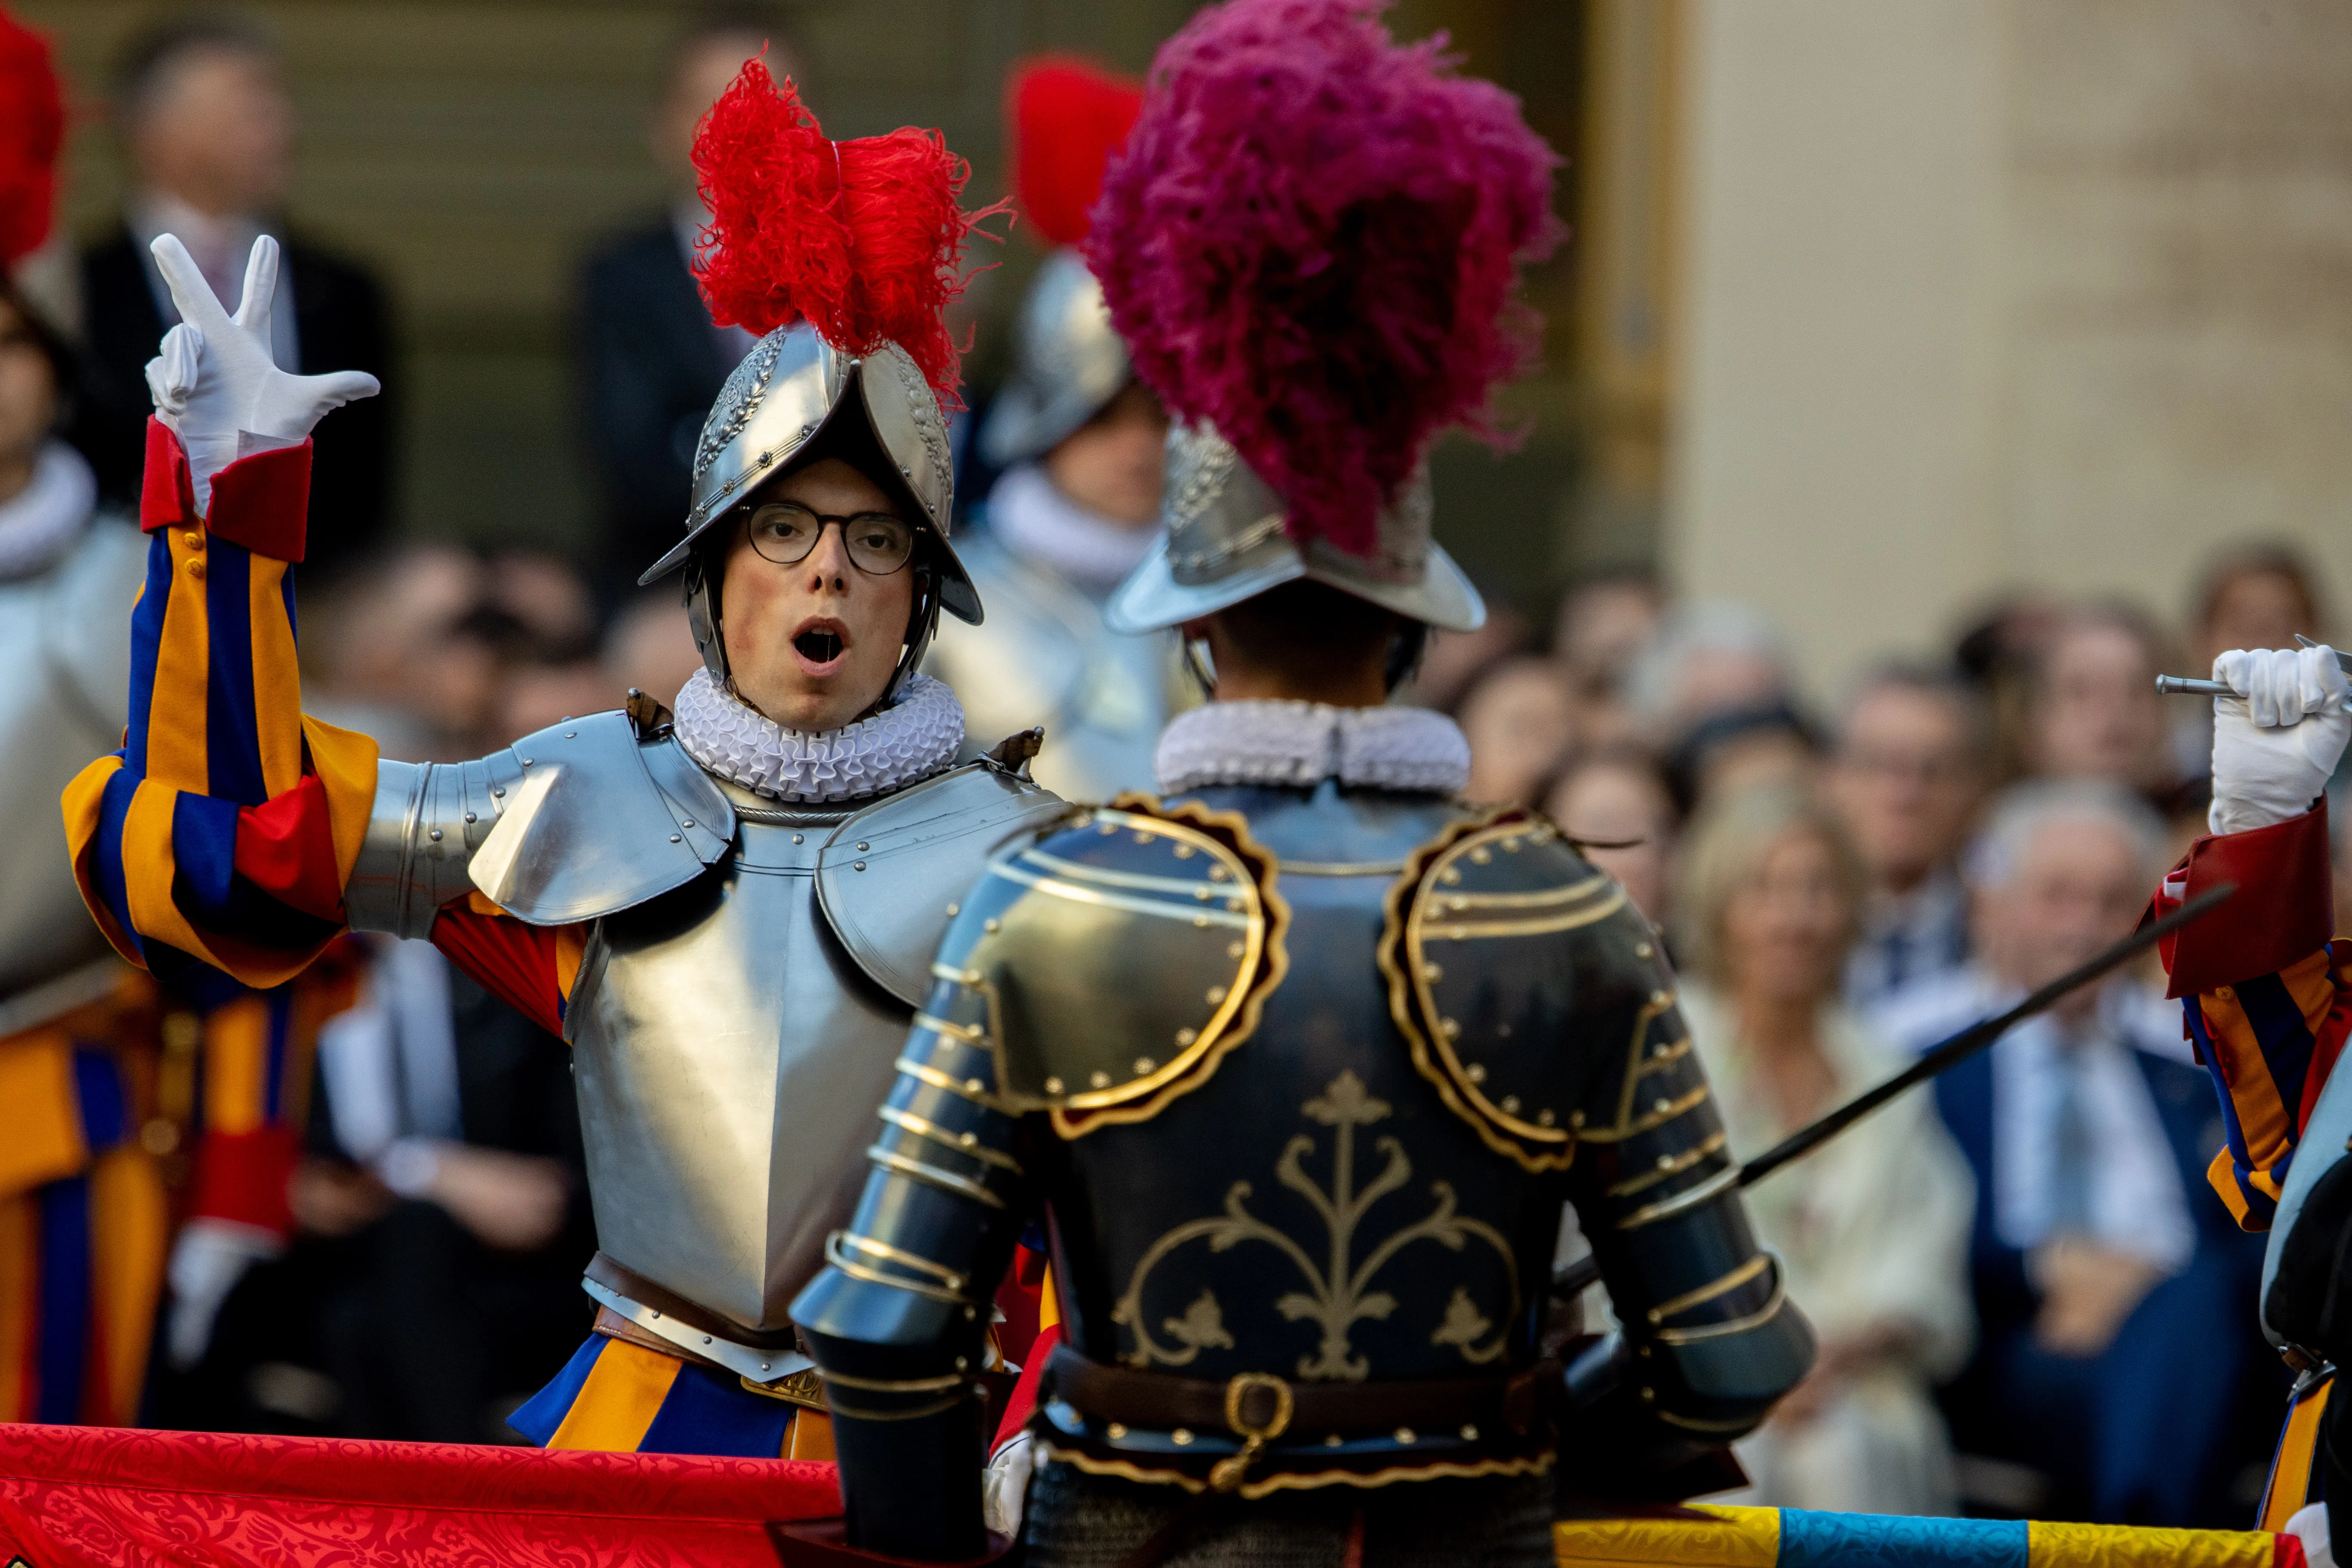 6 things to know about the Swiss Guard and its swearing&in ceremony